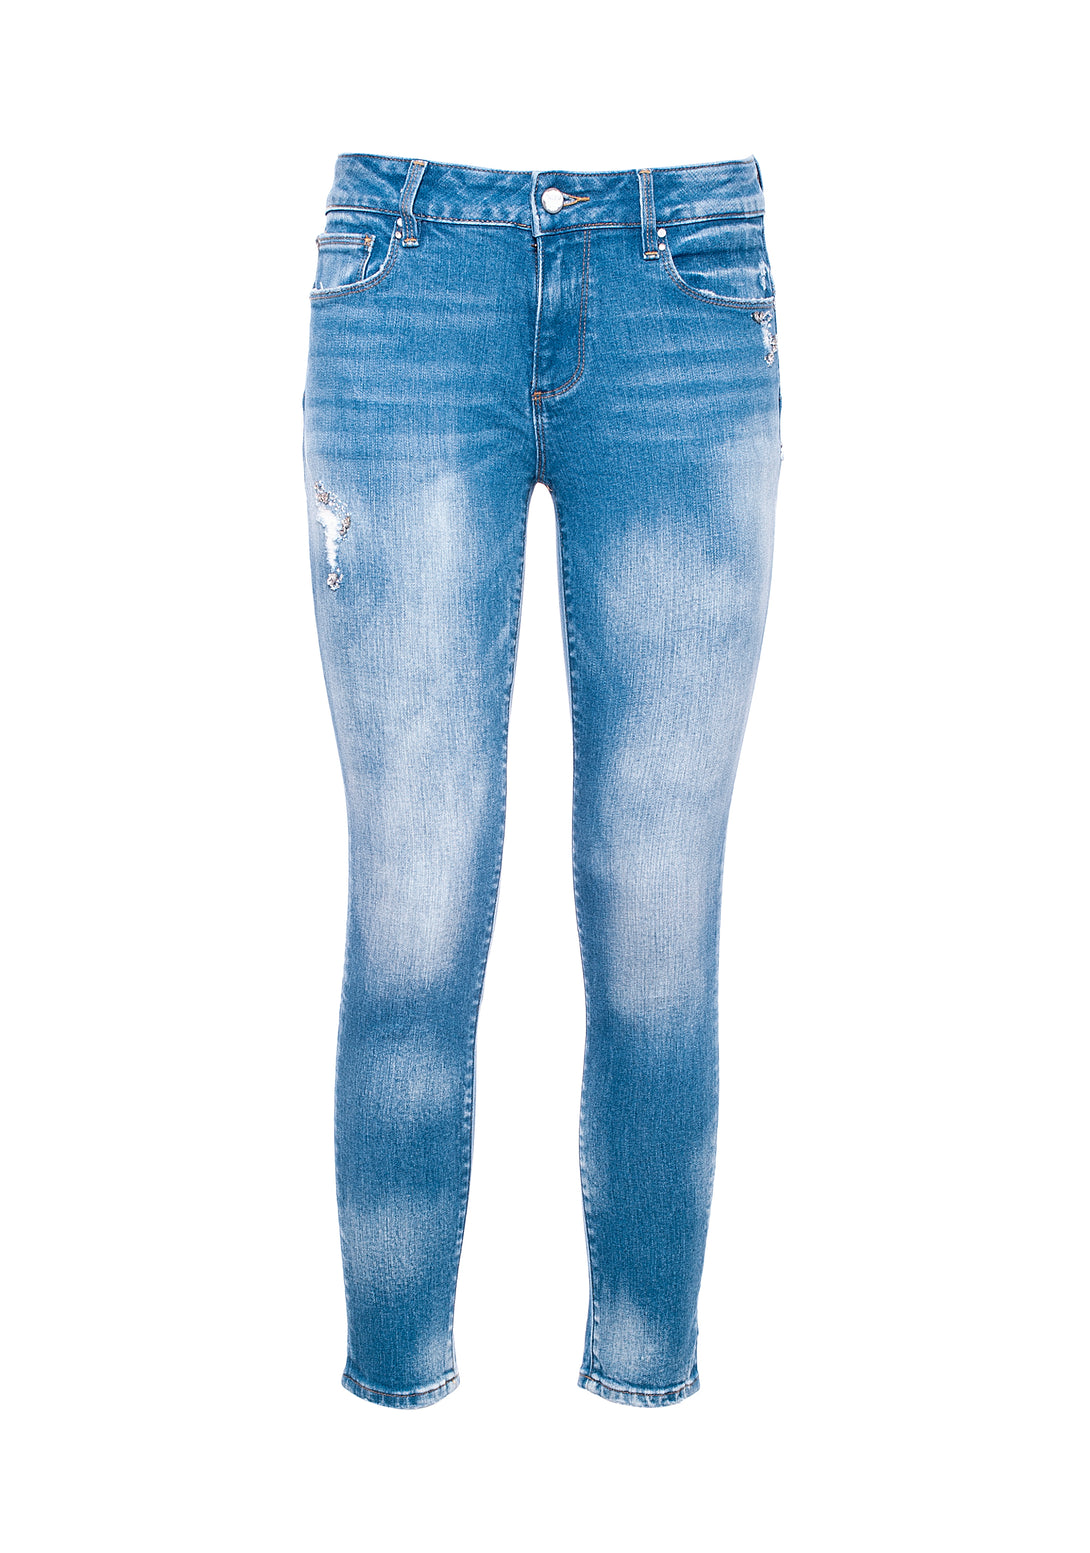 Jeans skinny fit made in stretch denim with light bleached wash